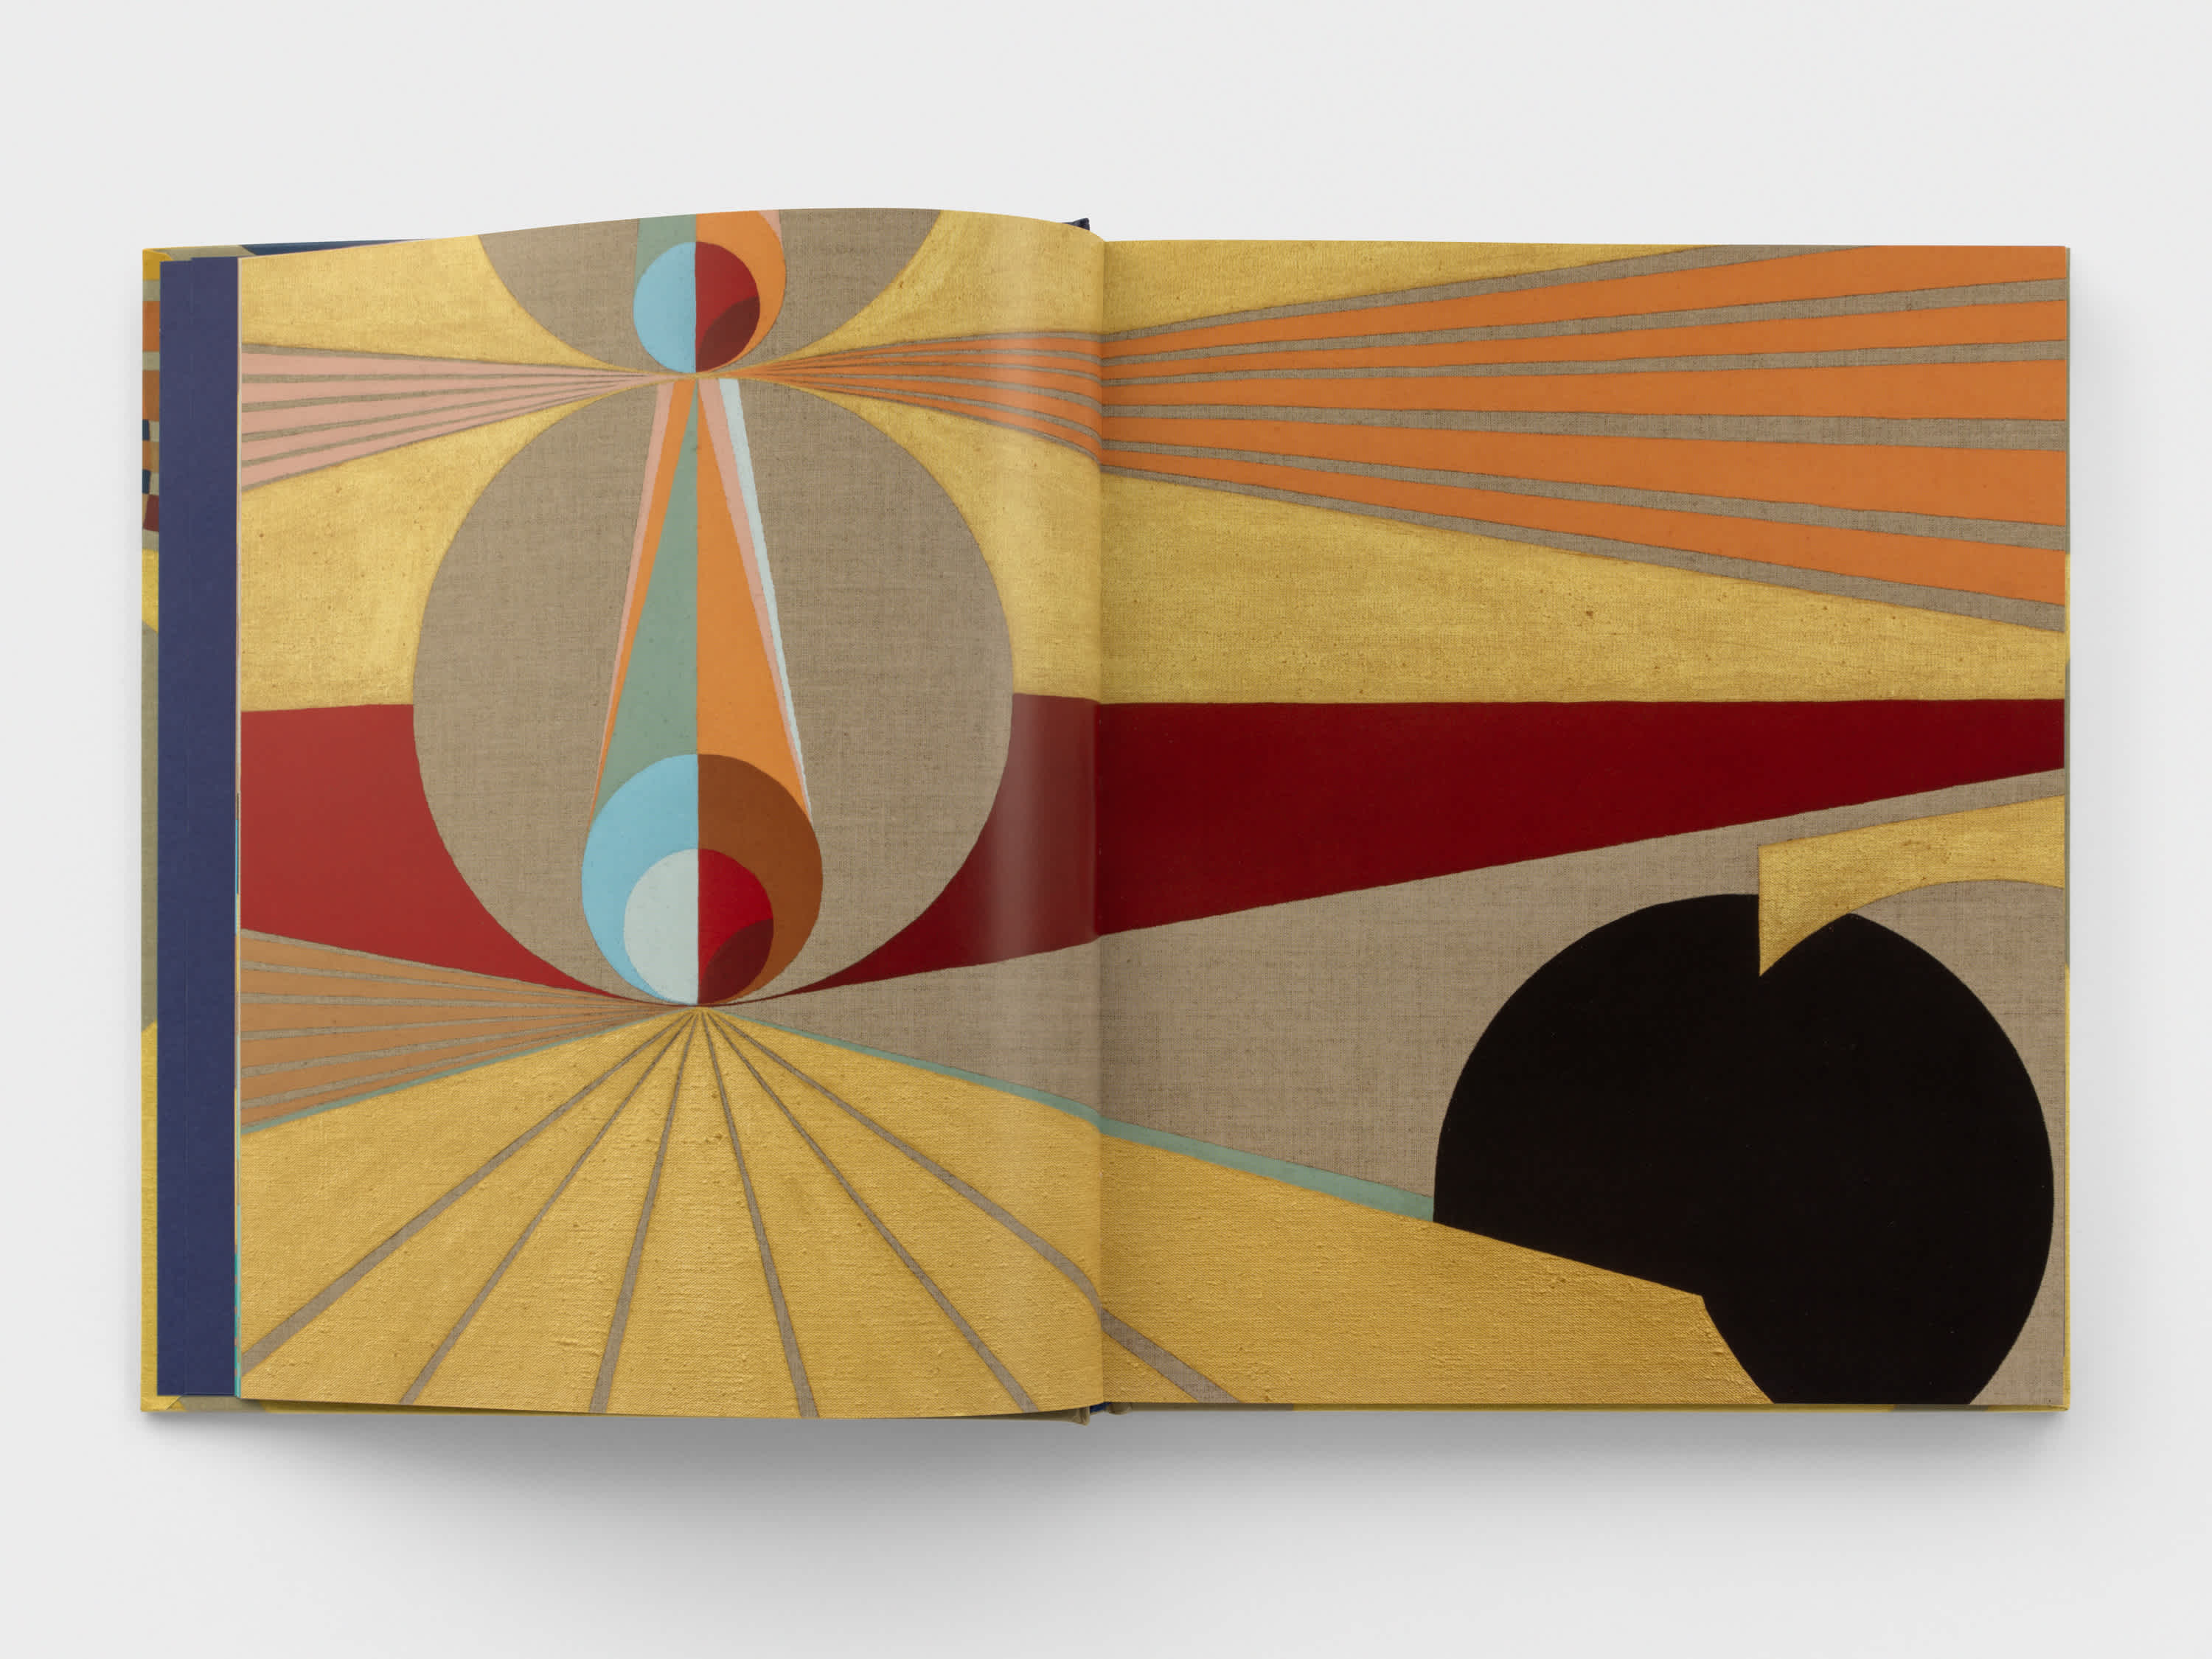 Open book with yellow, red, and sand geometric artwork on both pages.